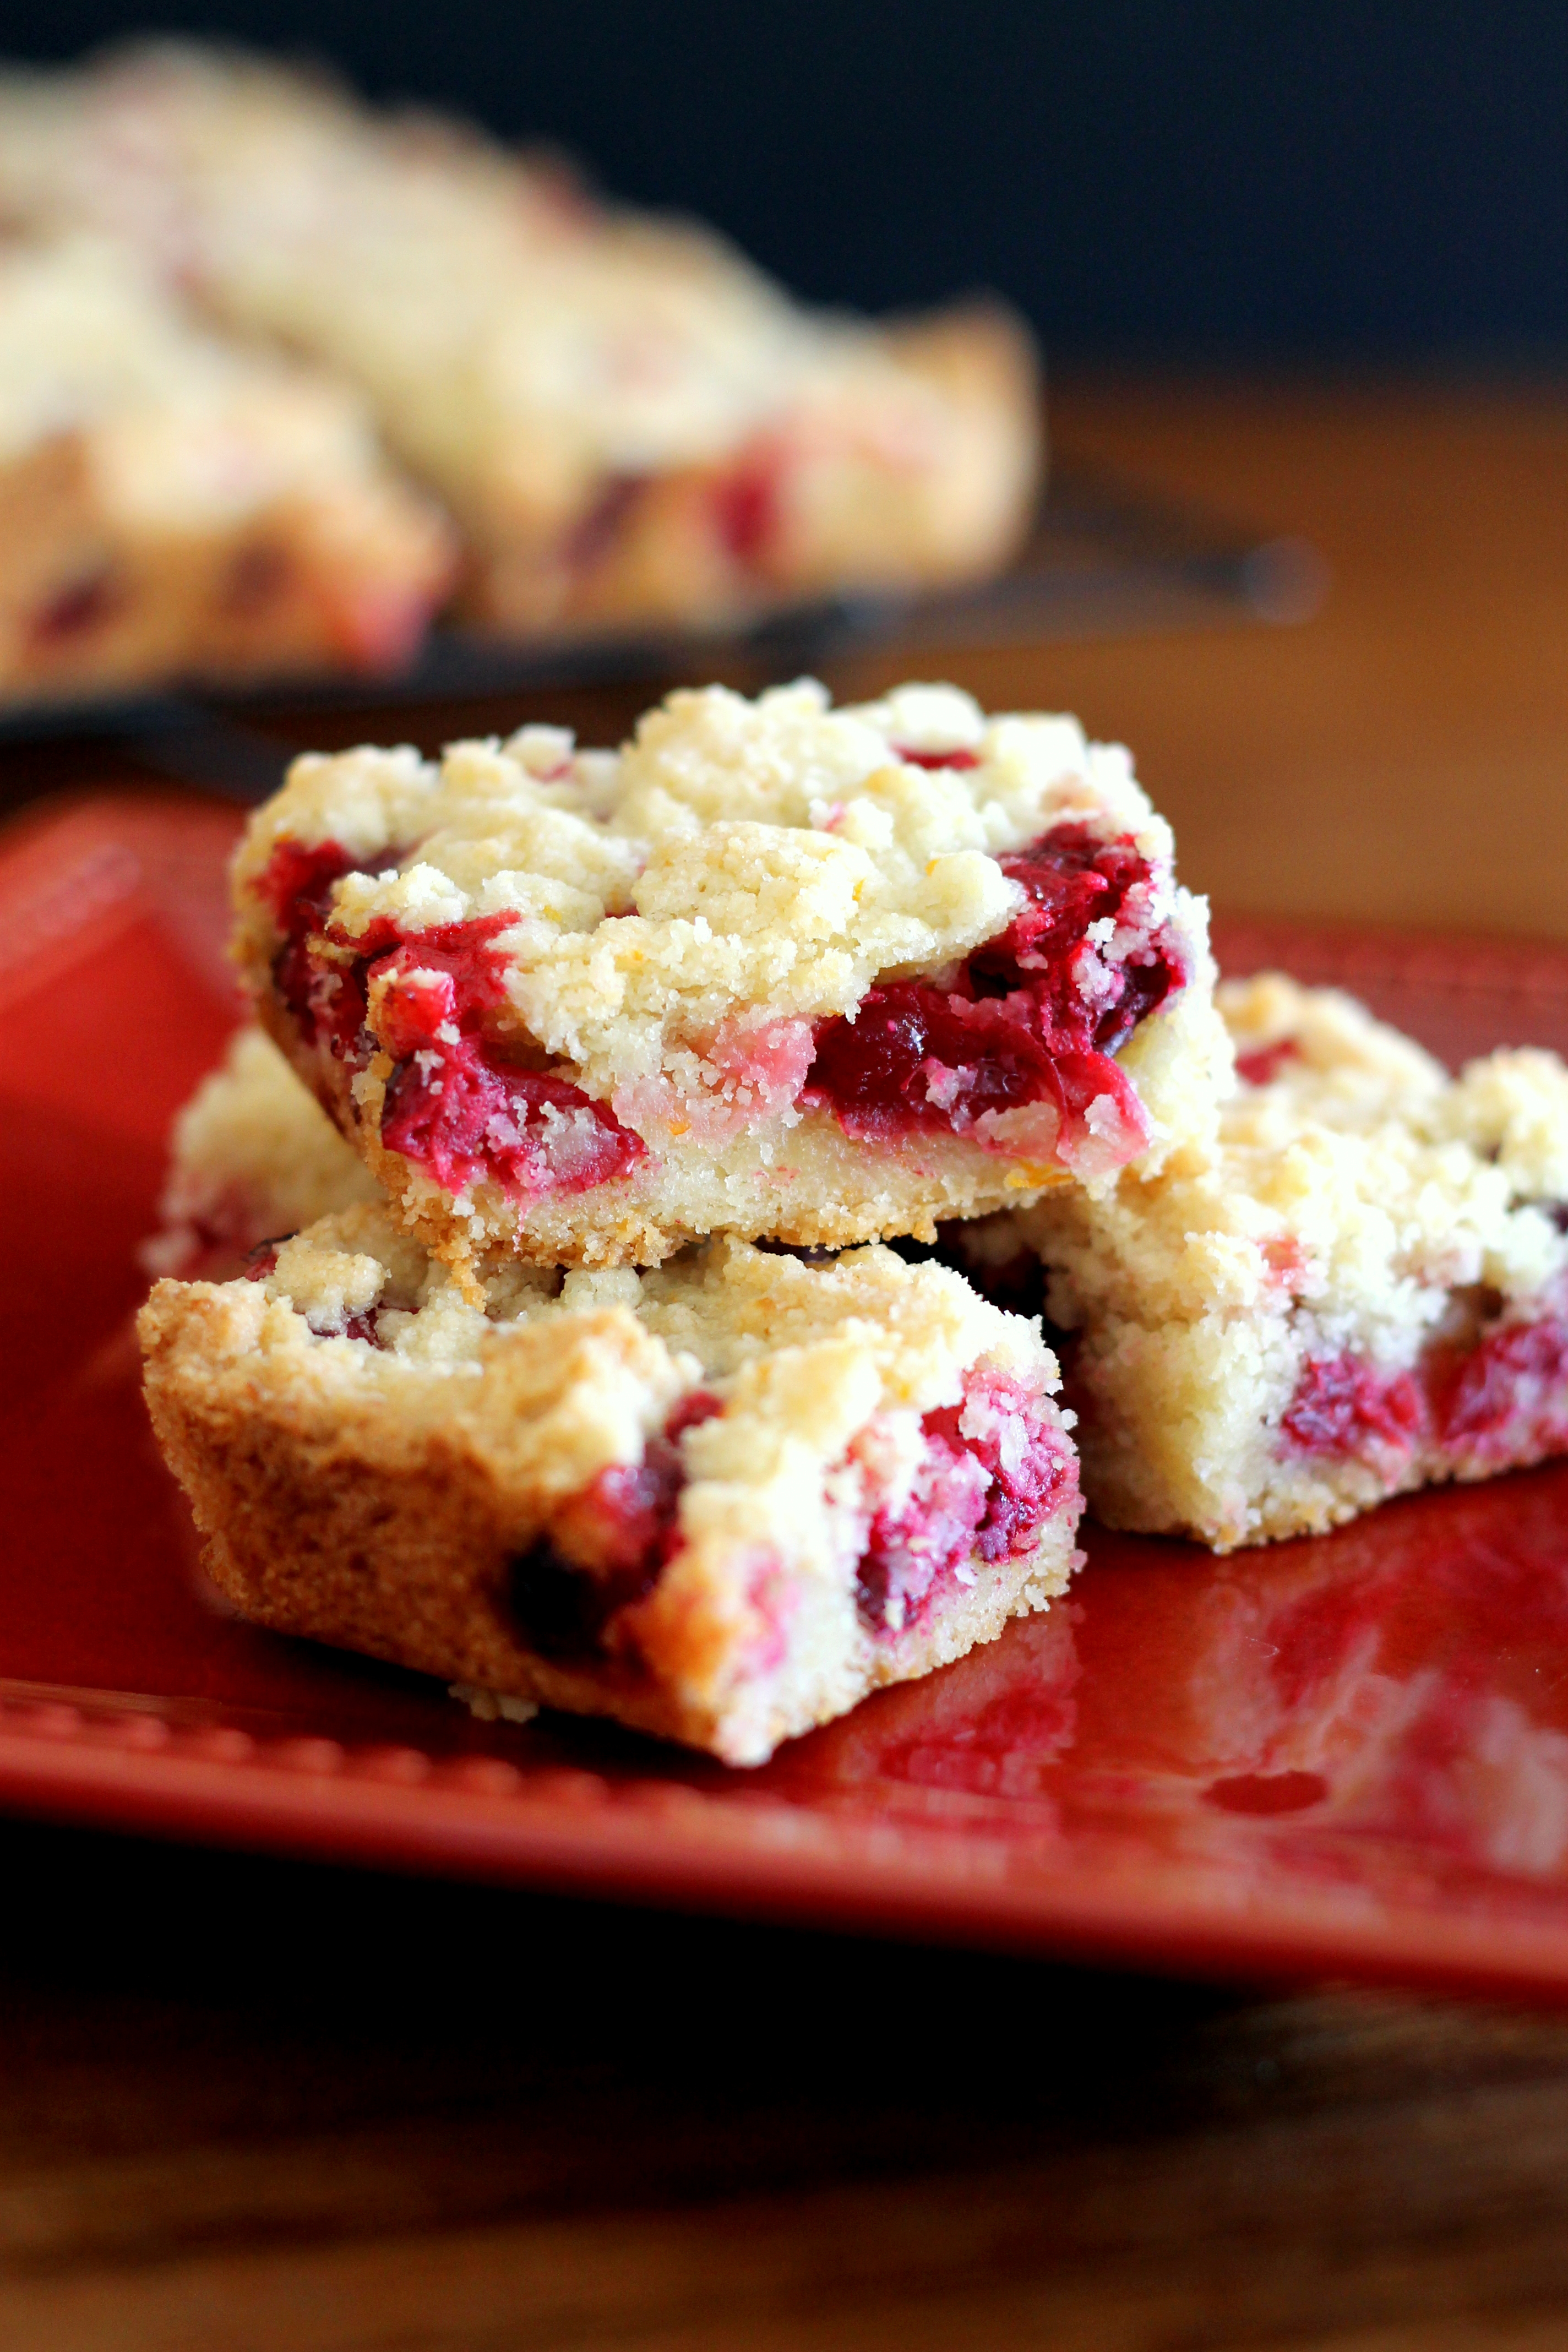 These easy Cranberry Crumb Bars are super portable, super delicious, and perfect for your holiday cookie platters!